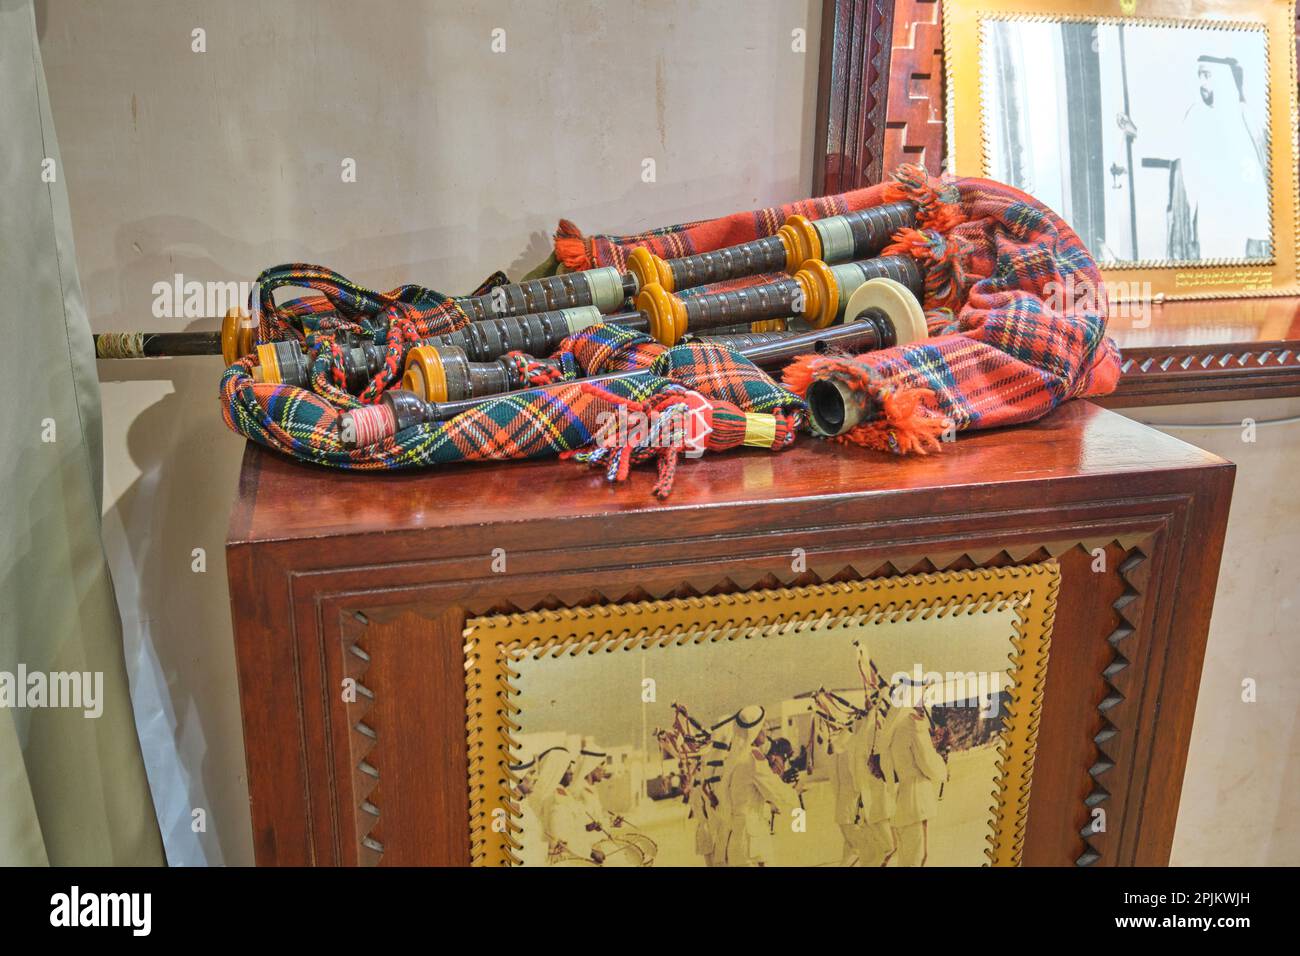 A set of British, Scottish bagpipes, used by the military during parades. At the Sheikh Zayed bin Sultan Al Nahyan Heritage Center Museum in Abu Dhabi Stock Photo